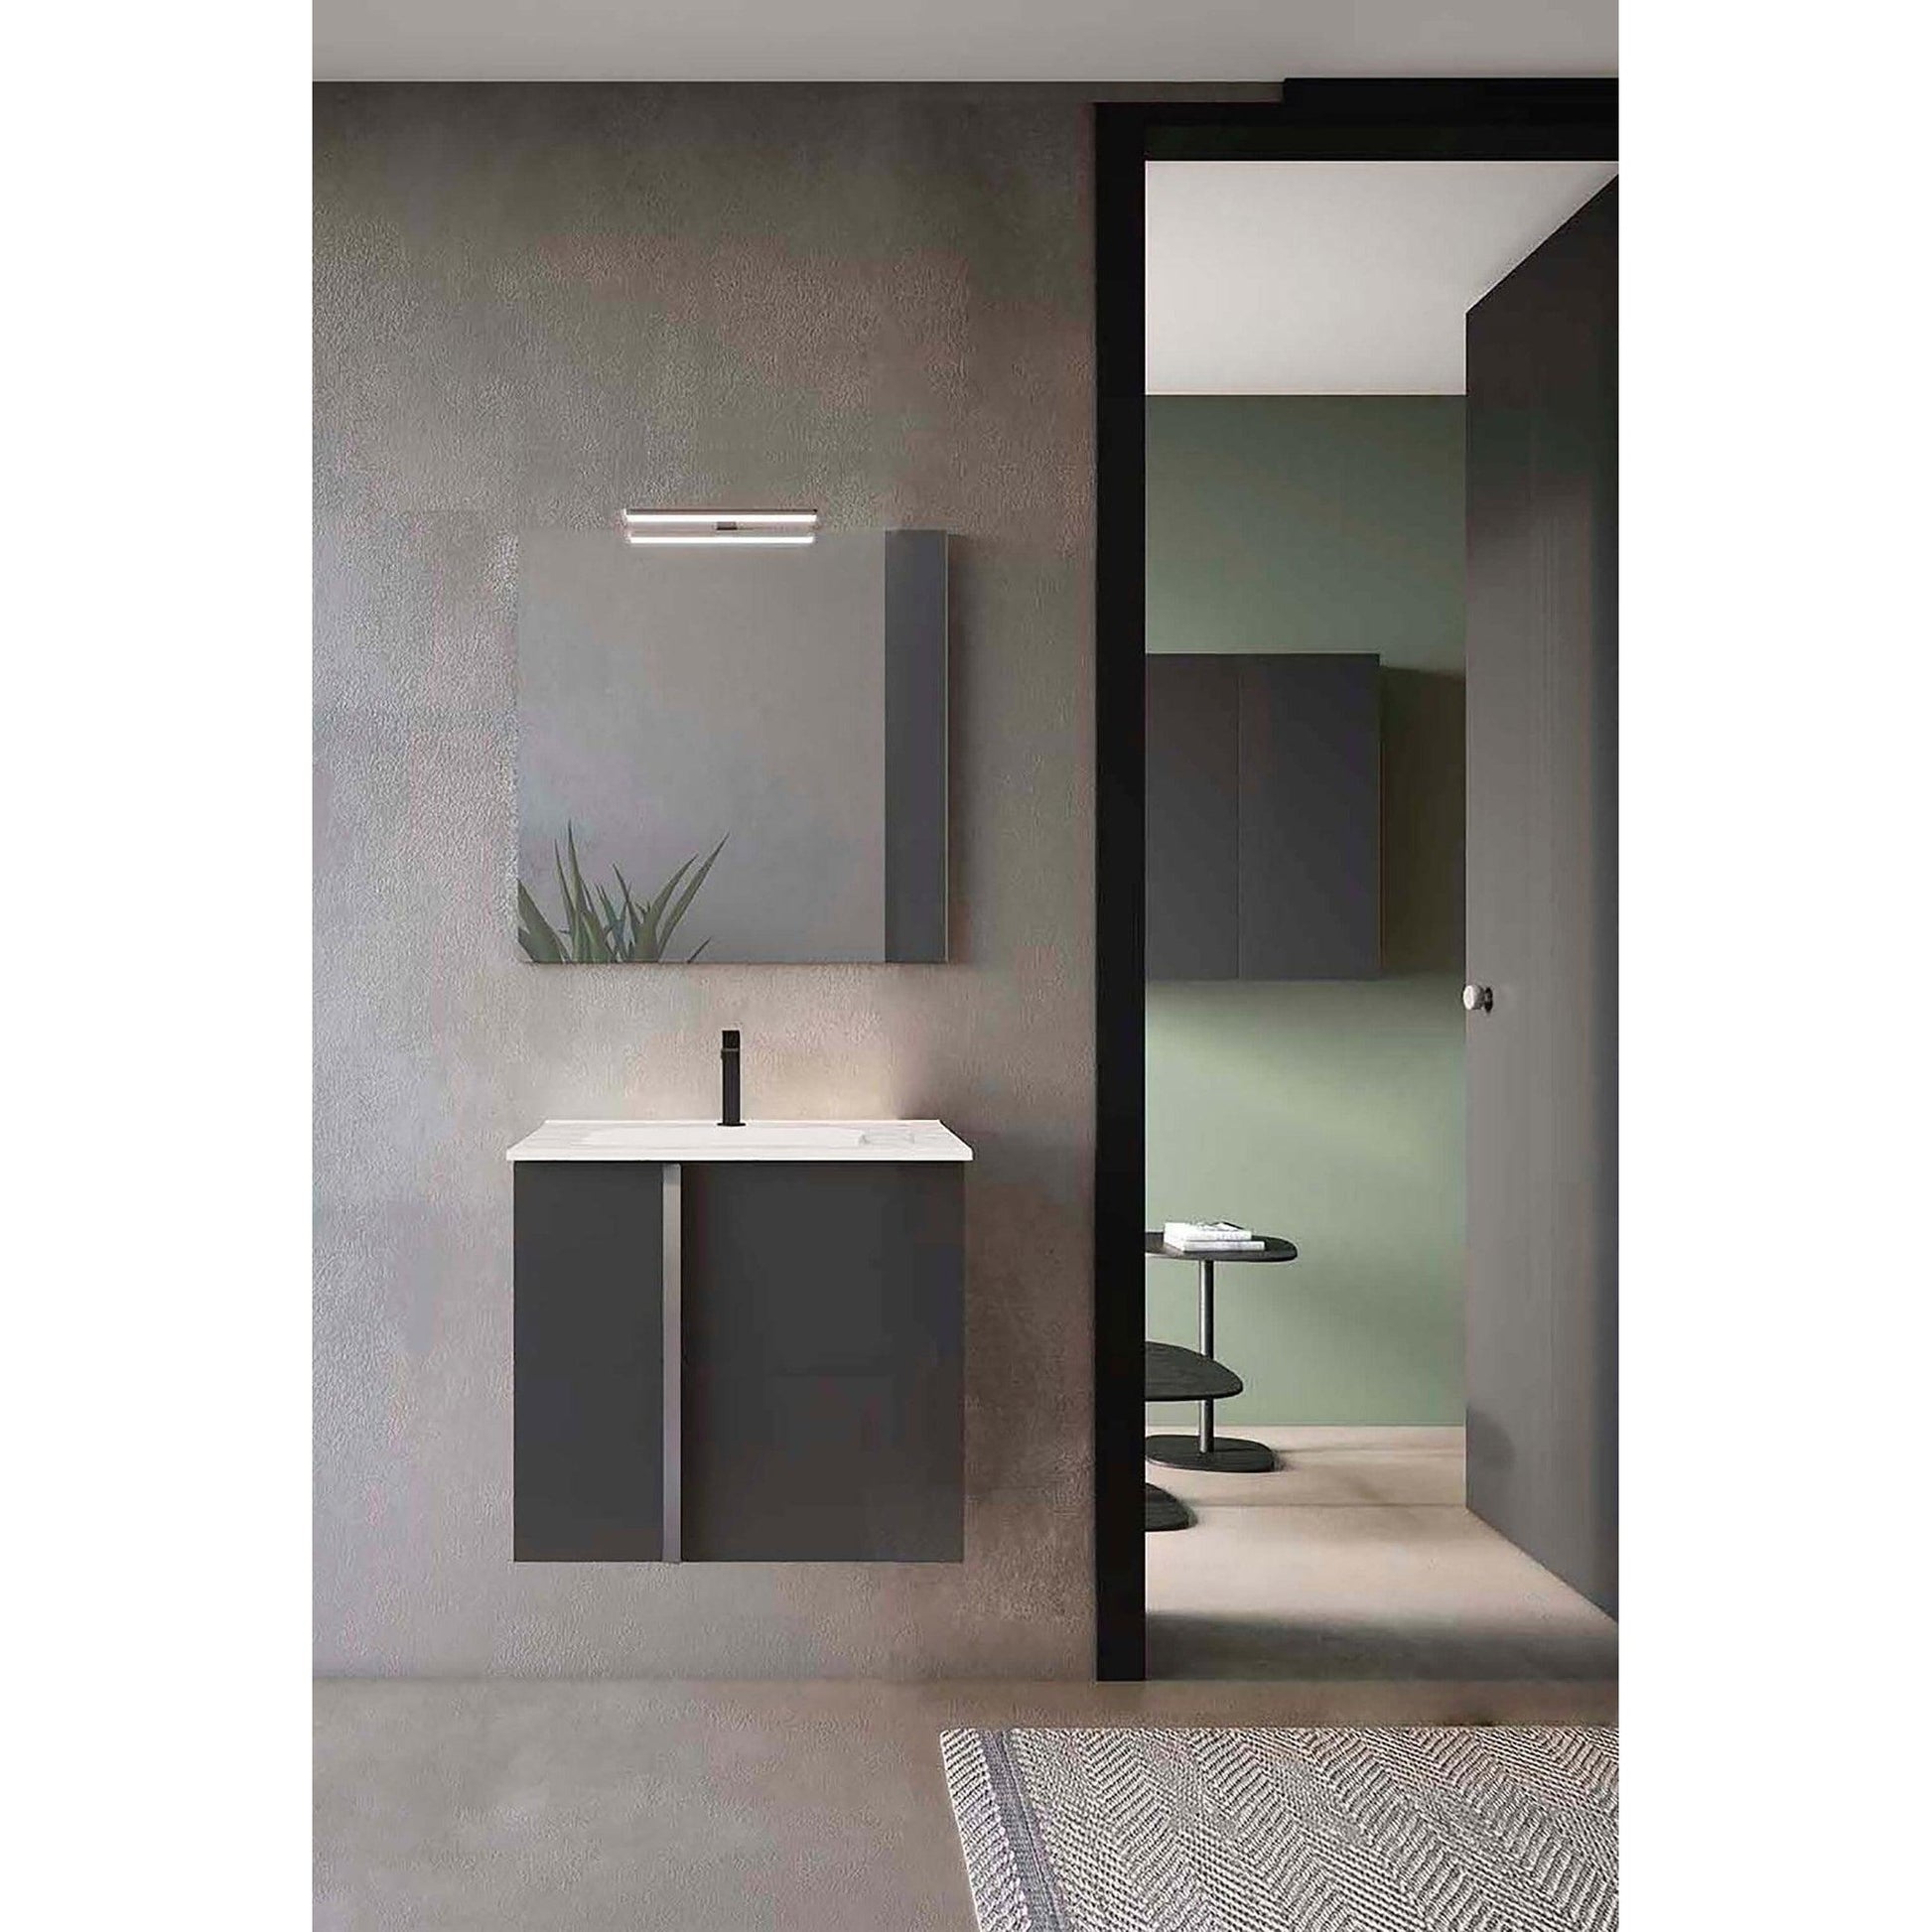 Royo Onix+ 24" x 18" Anthracite Modern Wall-mounted Vanity With 2 Doors and Chrome Handle